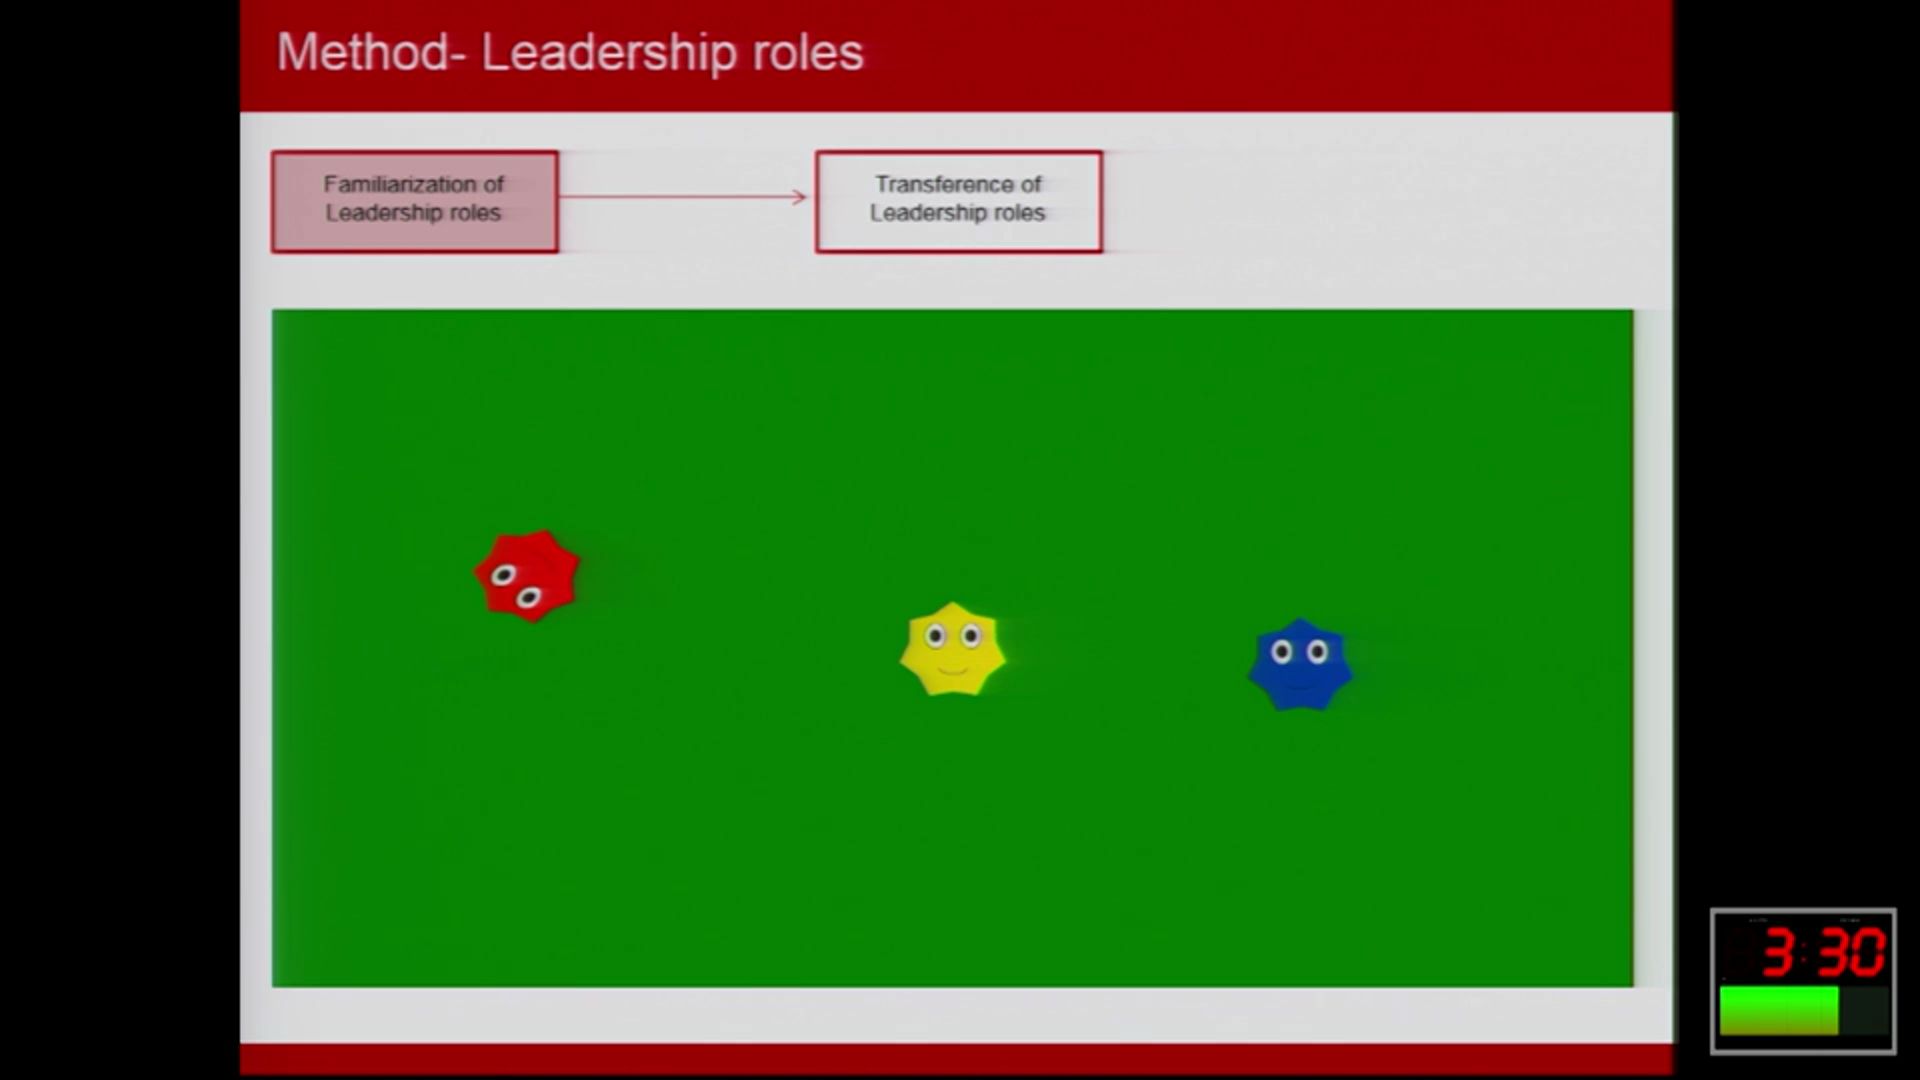 Who should be the leader? Infants' representation of leadership roles